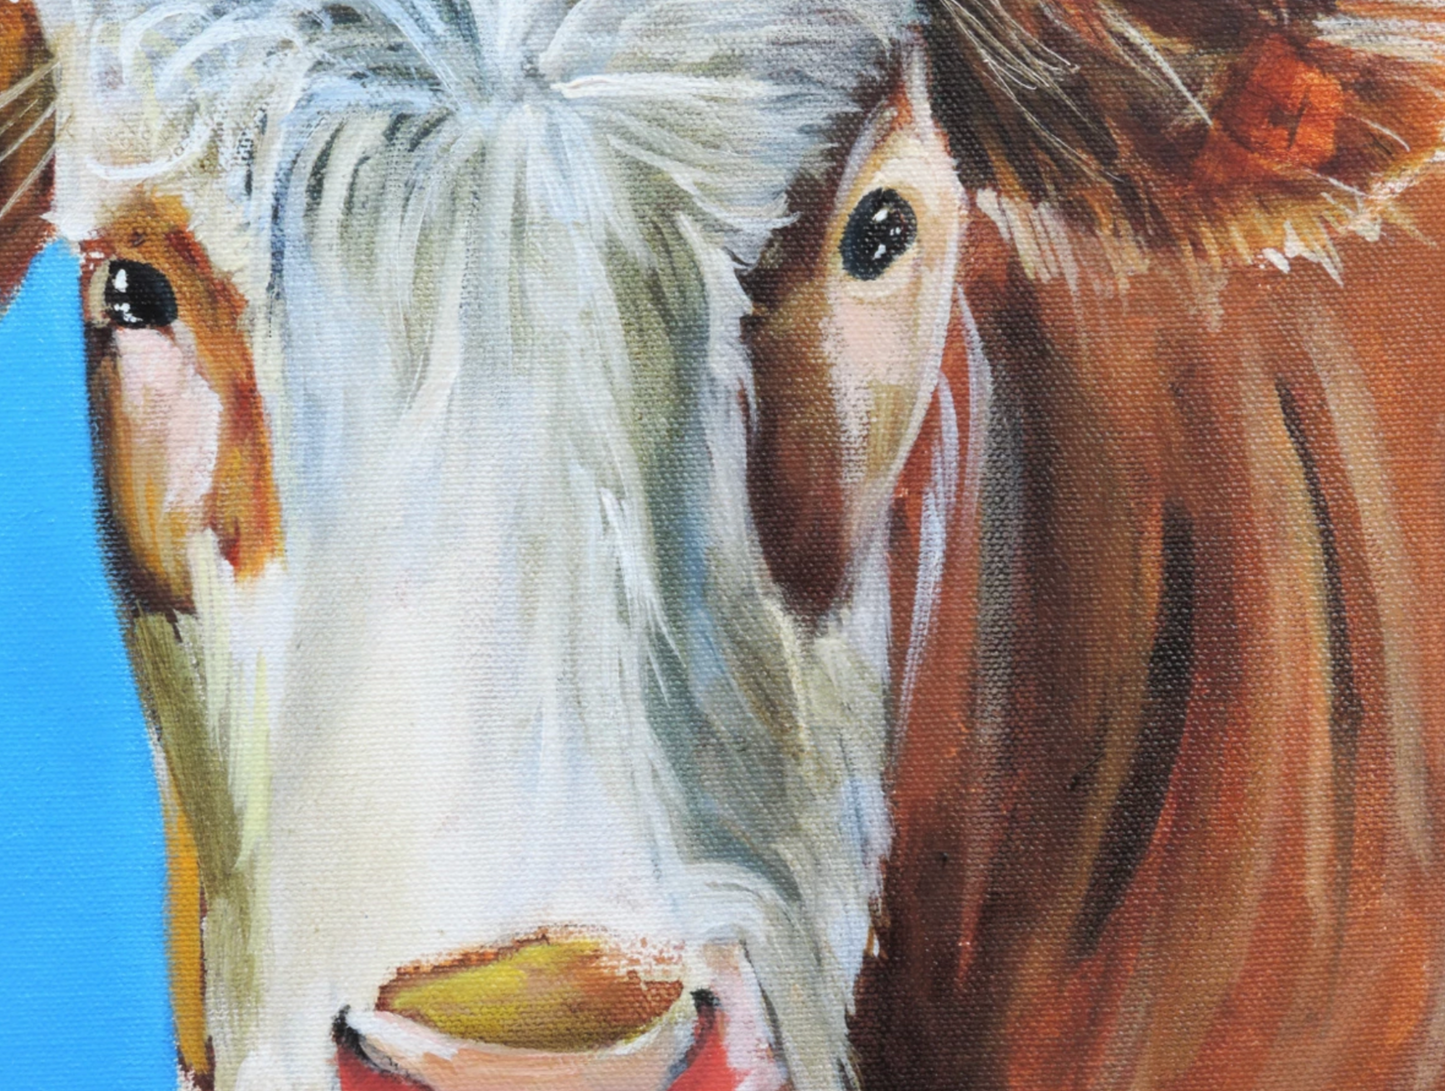 Cow painting a portrait in blue (2020)